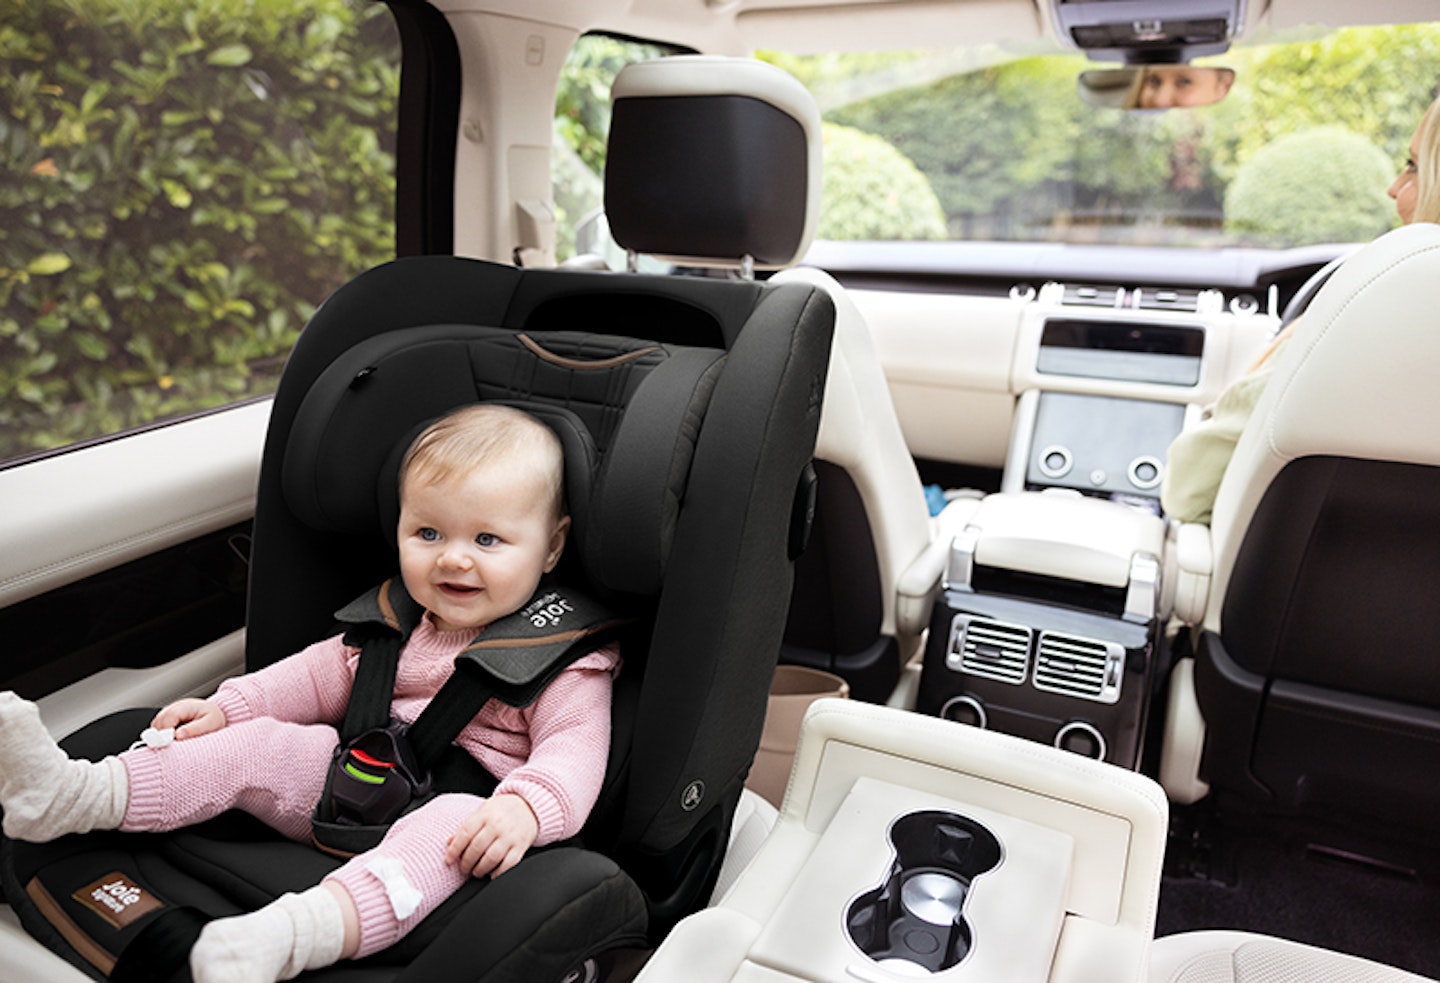 Joie Signature i-Spin 360 XL Car Seat